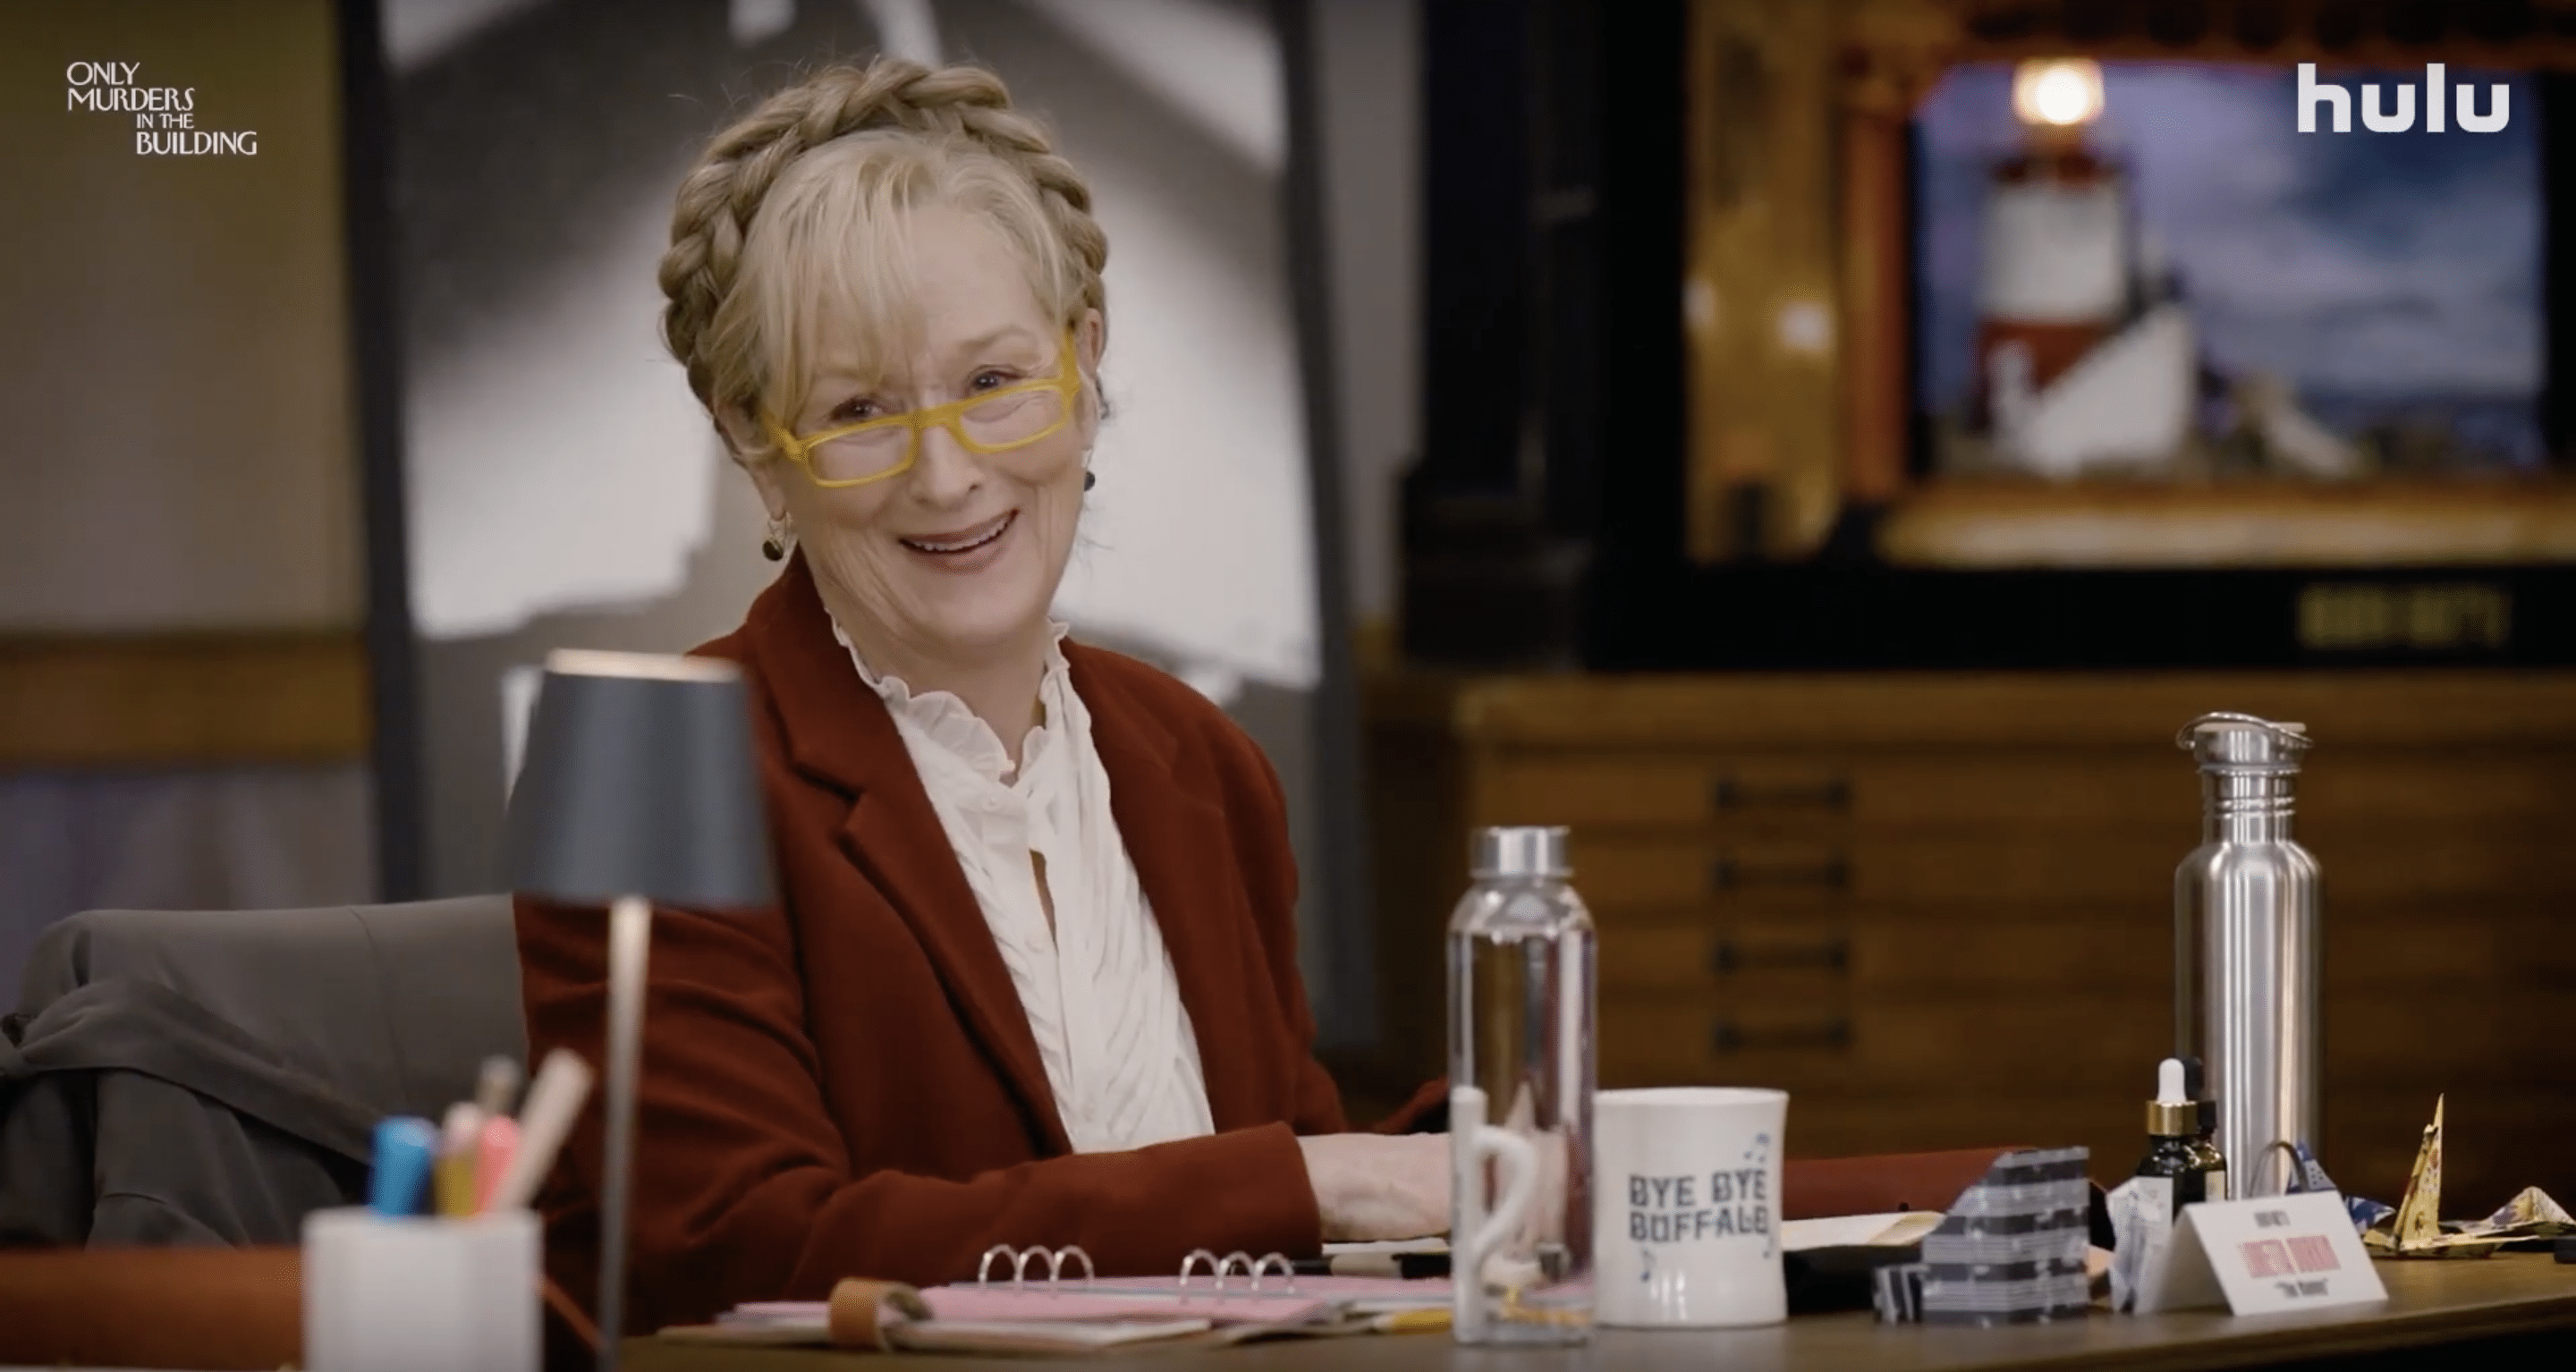 ‘Only Murders in the Building’ Shows Off Meryl Streep in First Season 3 Teaser